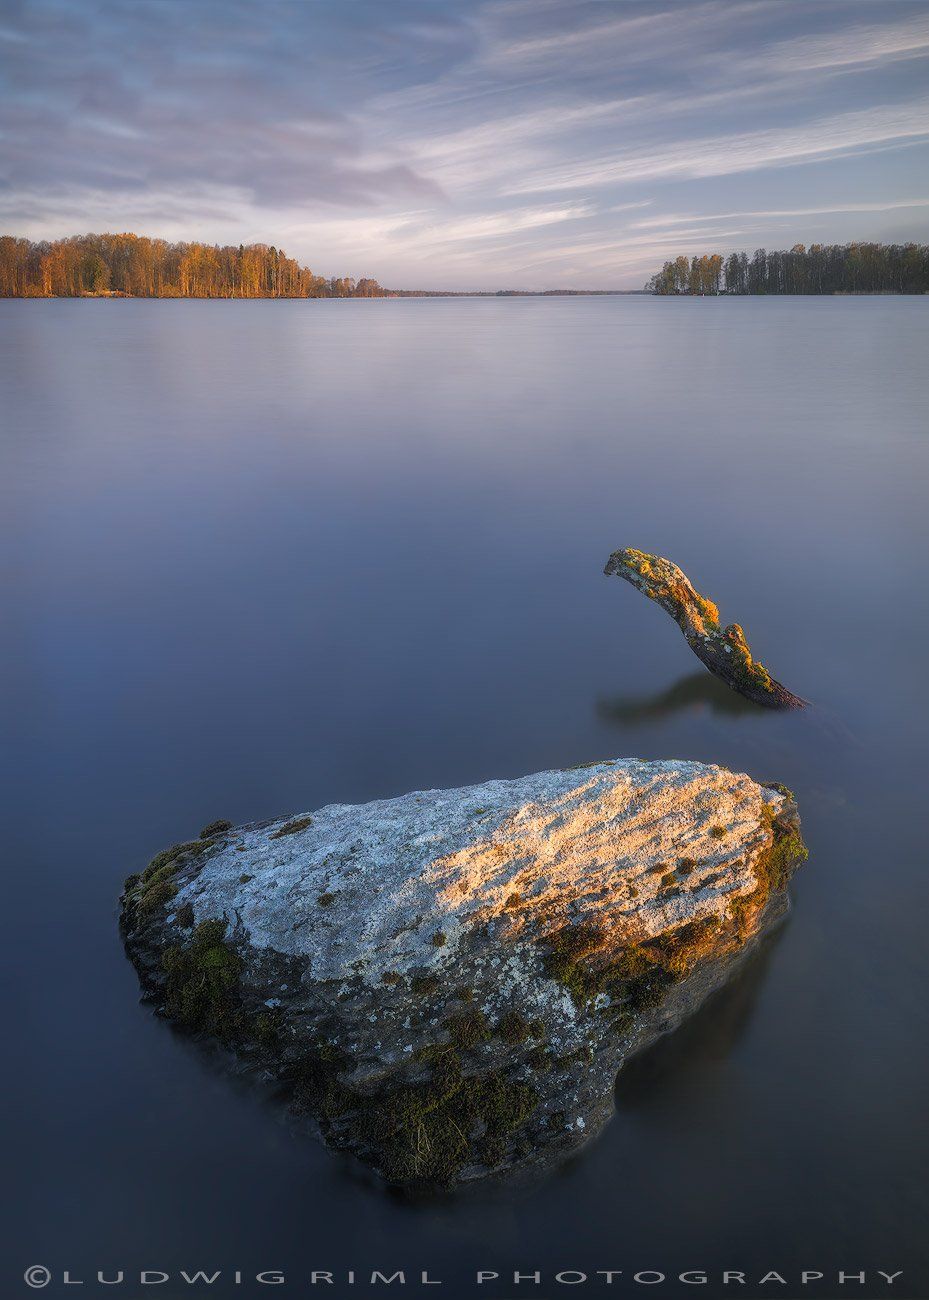 blue, branch, clouds, harmony, hjalmaren, lake, lichenes, lichens, morning, moss, nature, nature sight, outdoors, peace, rock, scandinavia, sunrise, sweden, tranquility, trees, water, Ludwig Riml